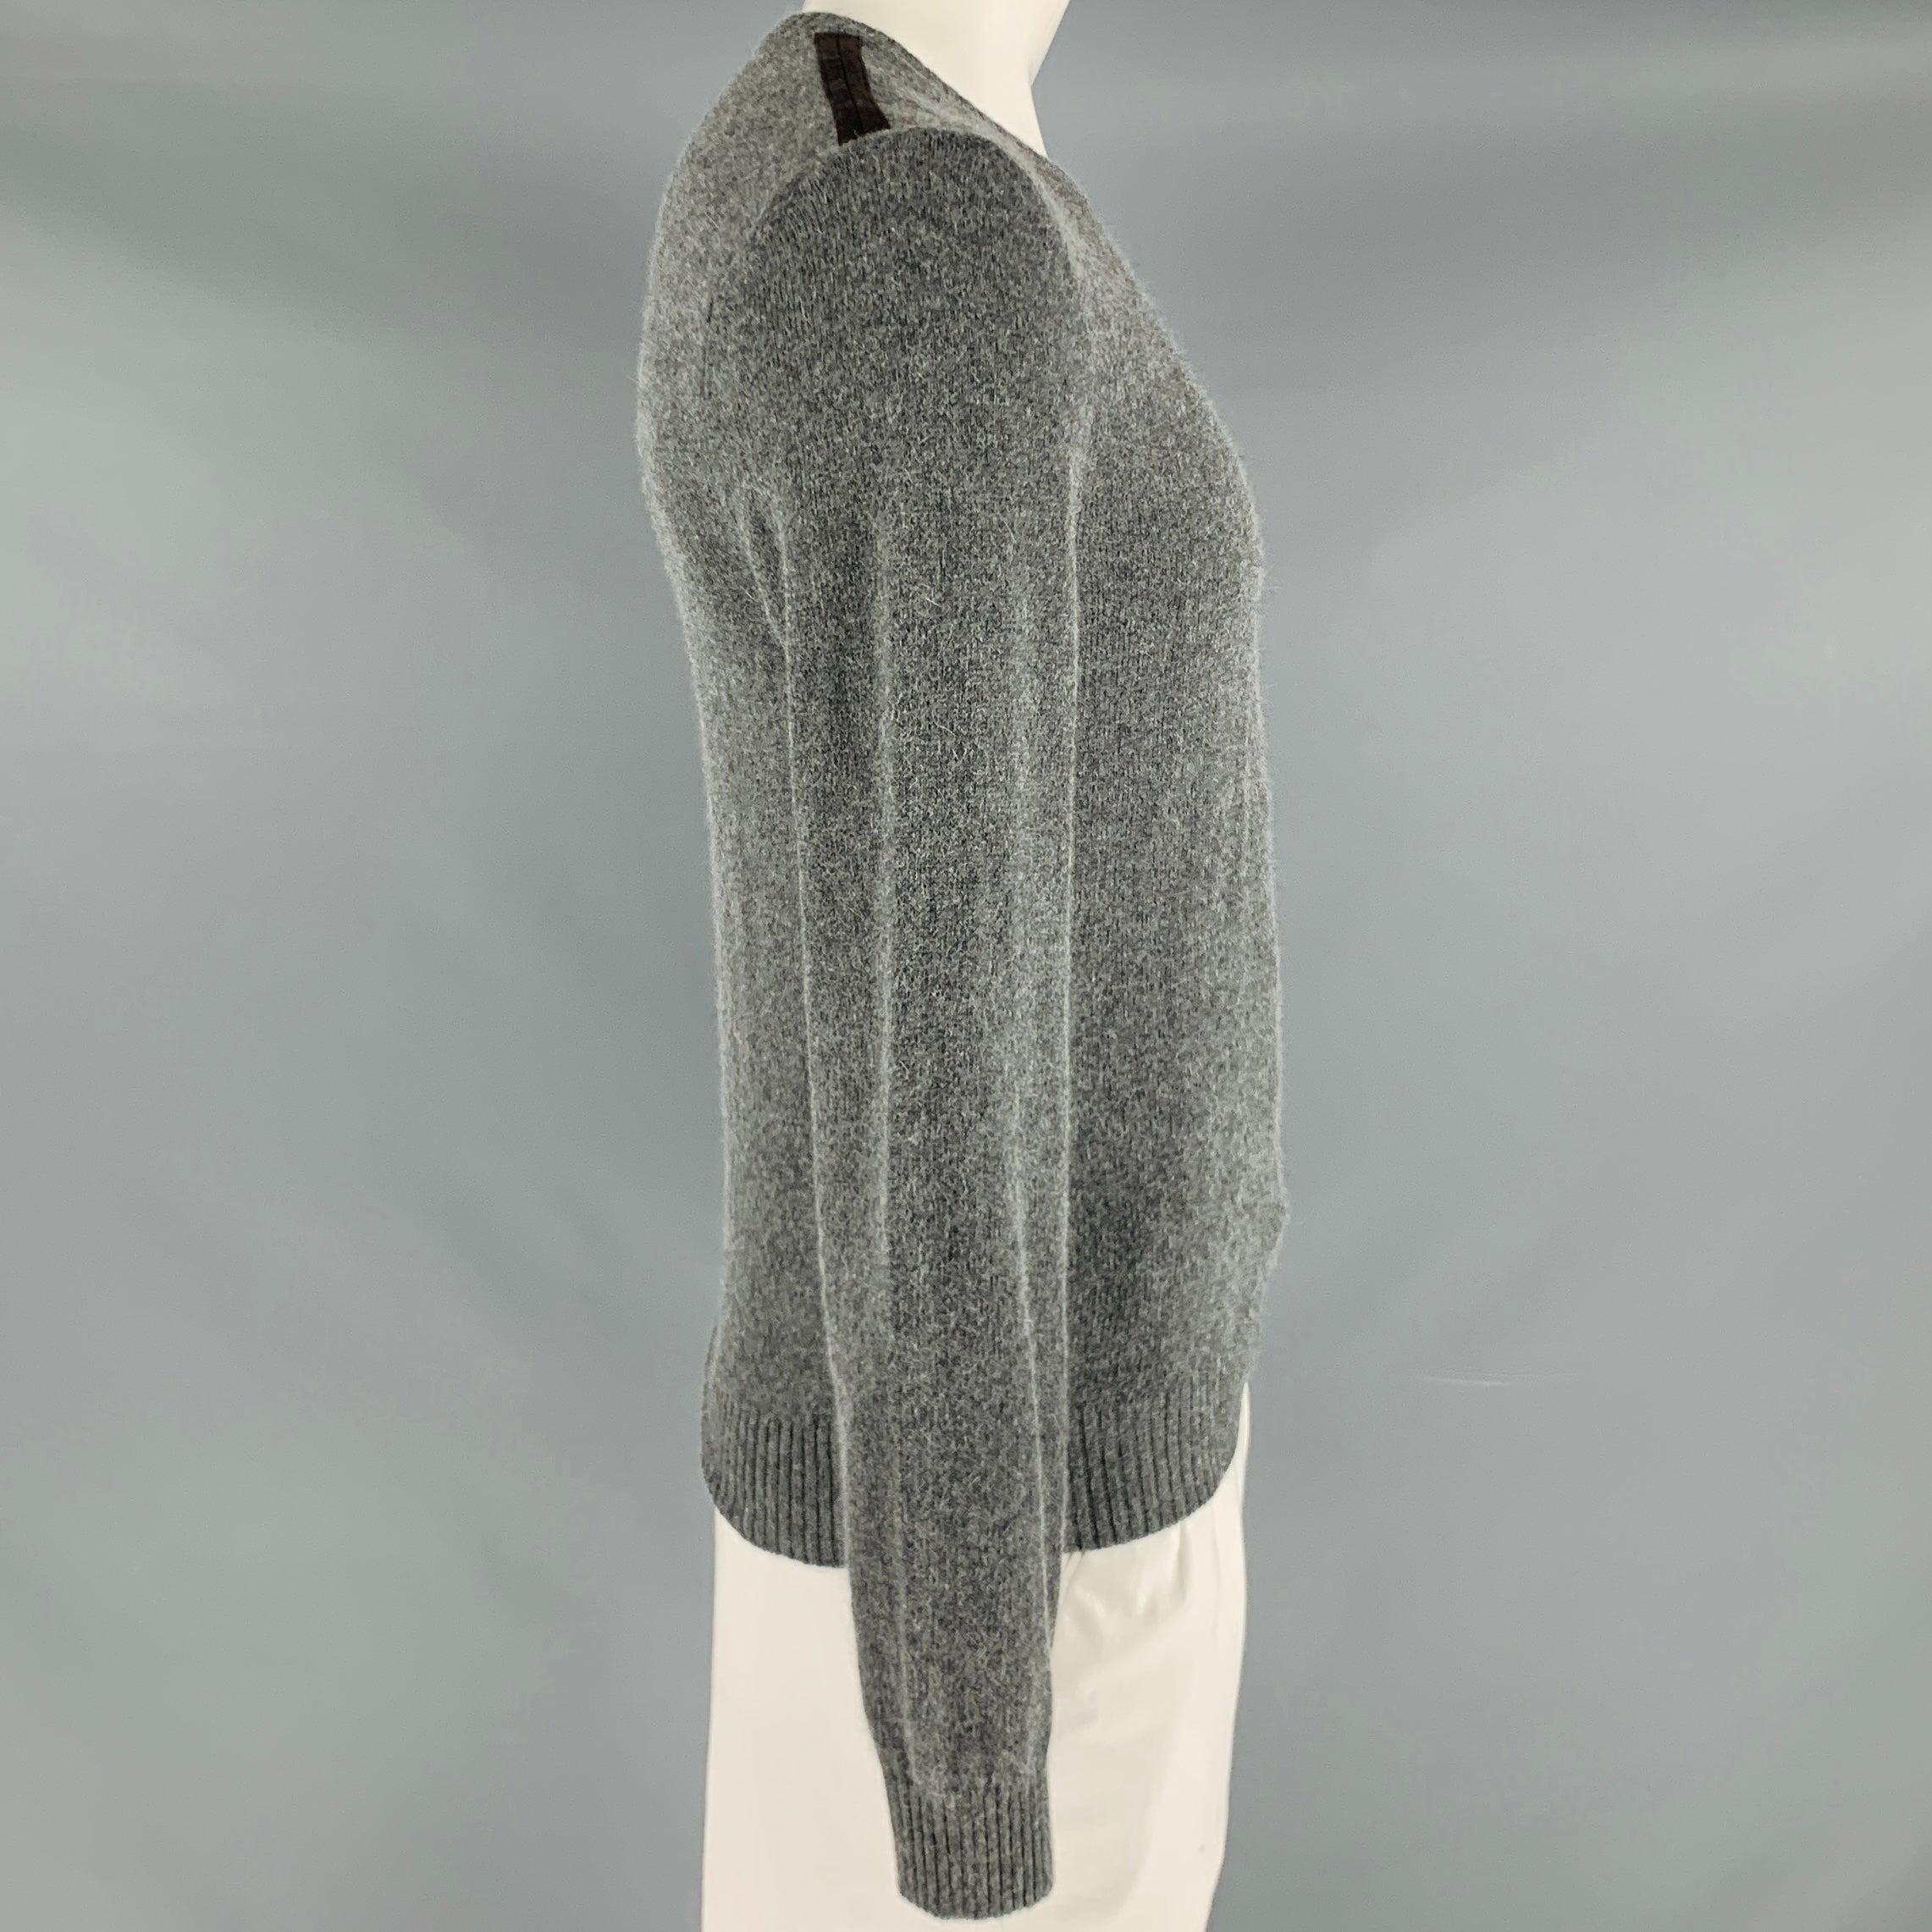 GUCCI sweater
in a grey alpaca blend knit featuring brown suede shoulder trim, blouson sleeves, and crew neck. Made in Italy.Excellent Pre-Owned Condition. 

Marked:   L 

Measurements: 
 
Shoulder: 17.5 inches Chest: 39 inches Sleeve: 28 inches